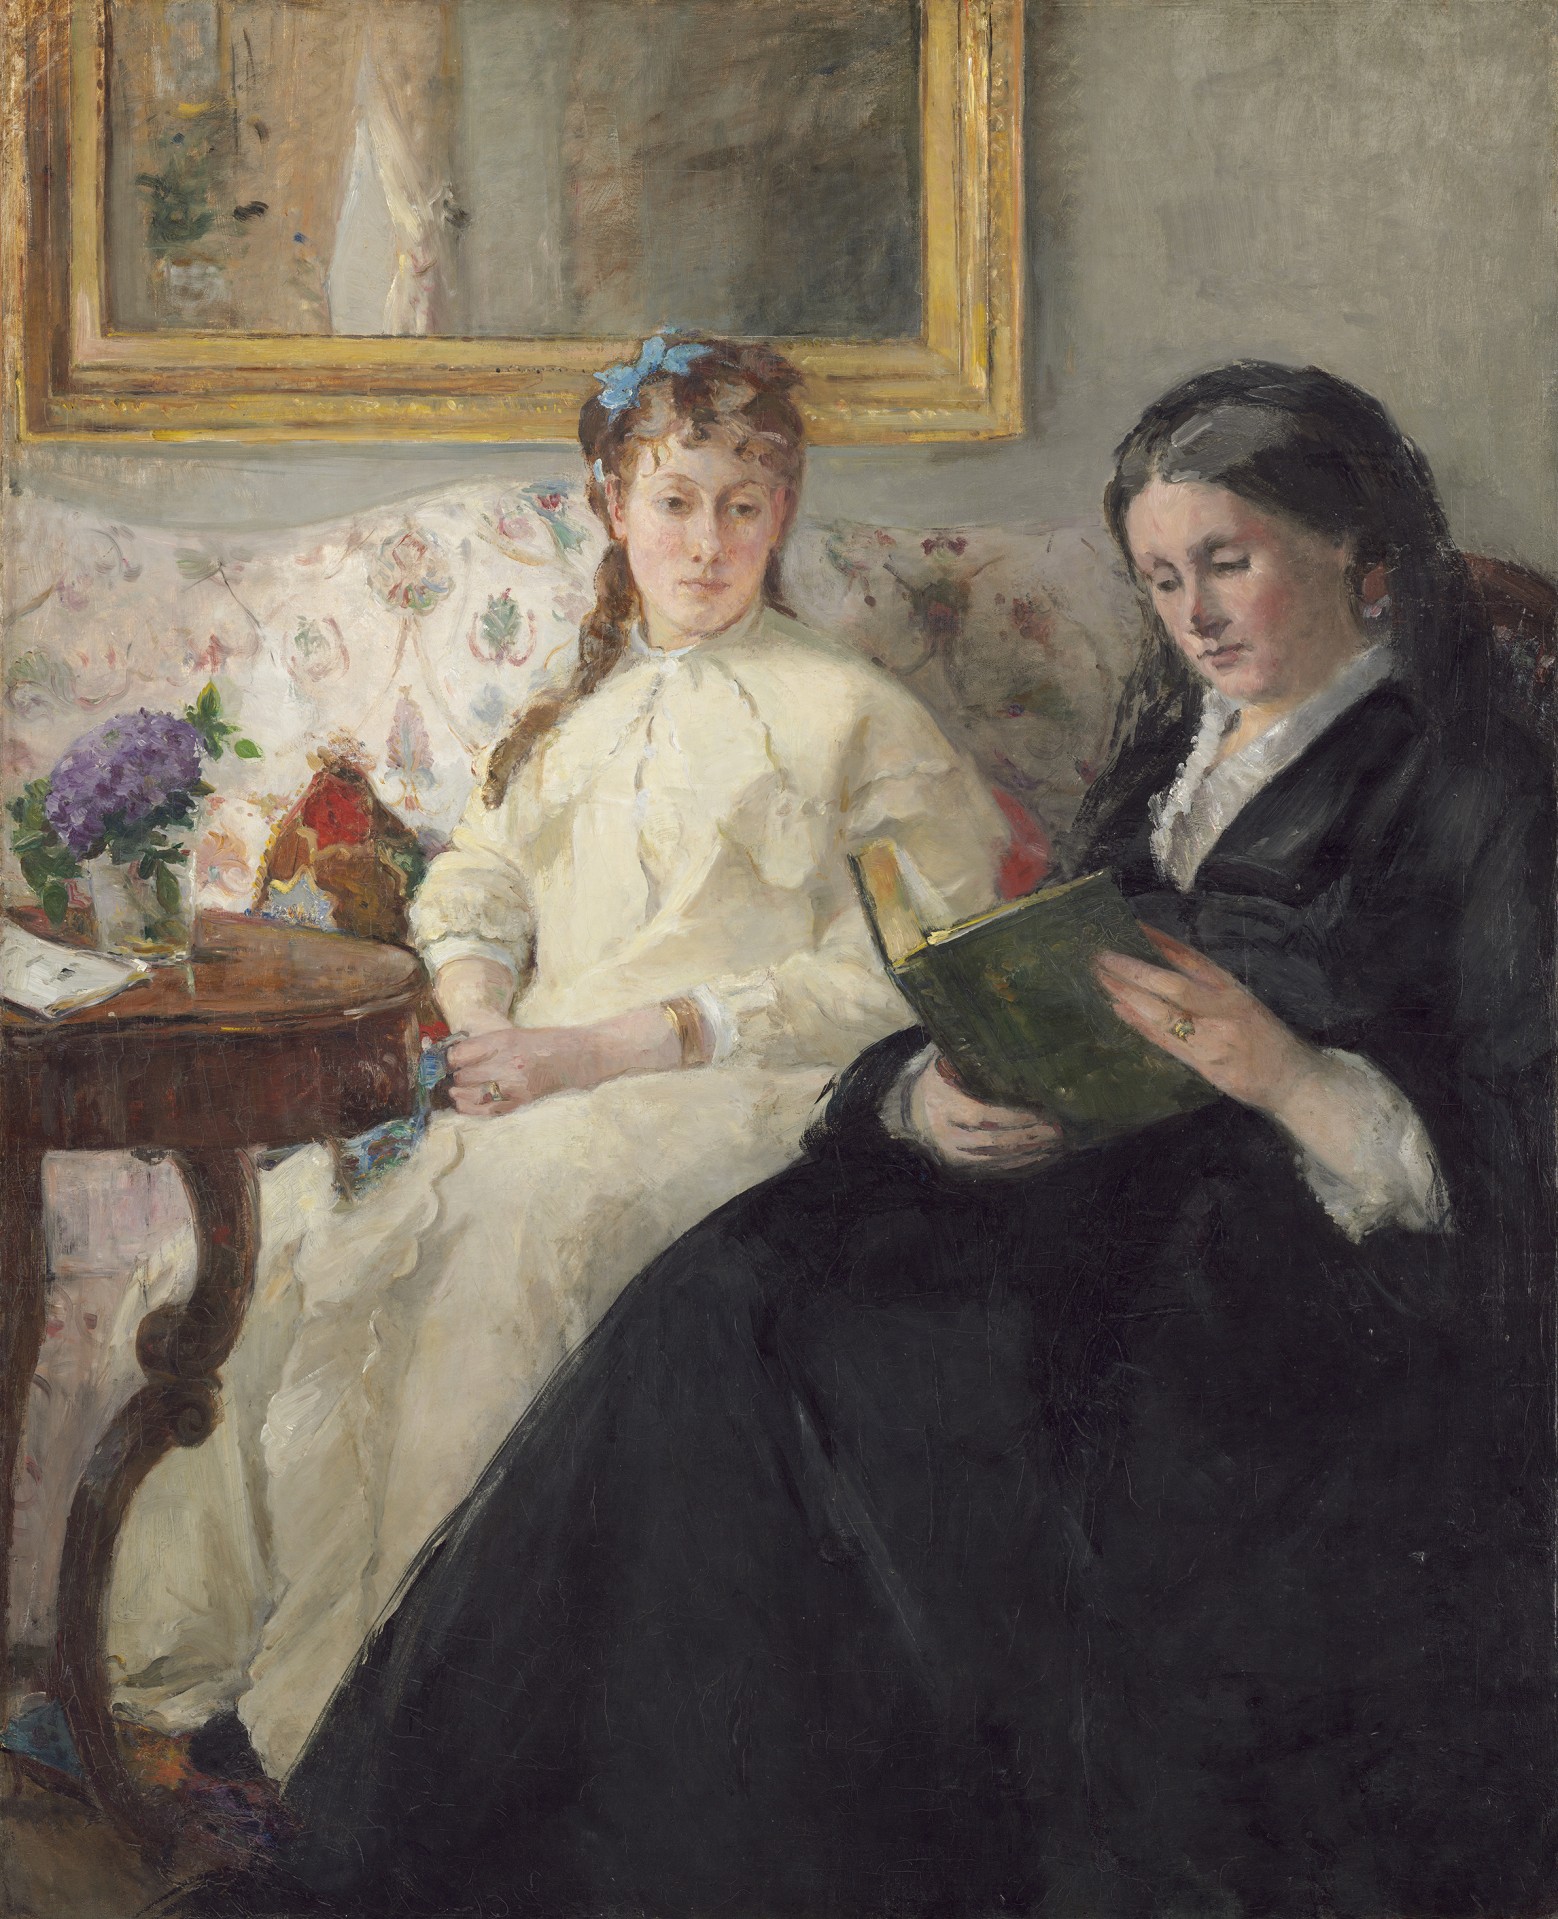 Public domain vintage painting by Berthe Morisot, available from The National Gallery of Art.